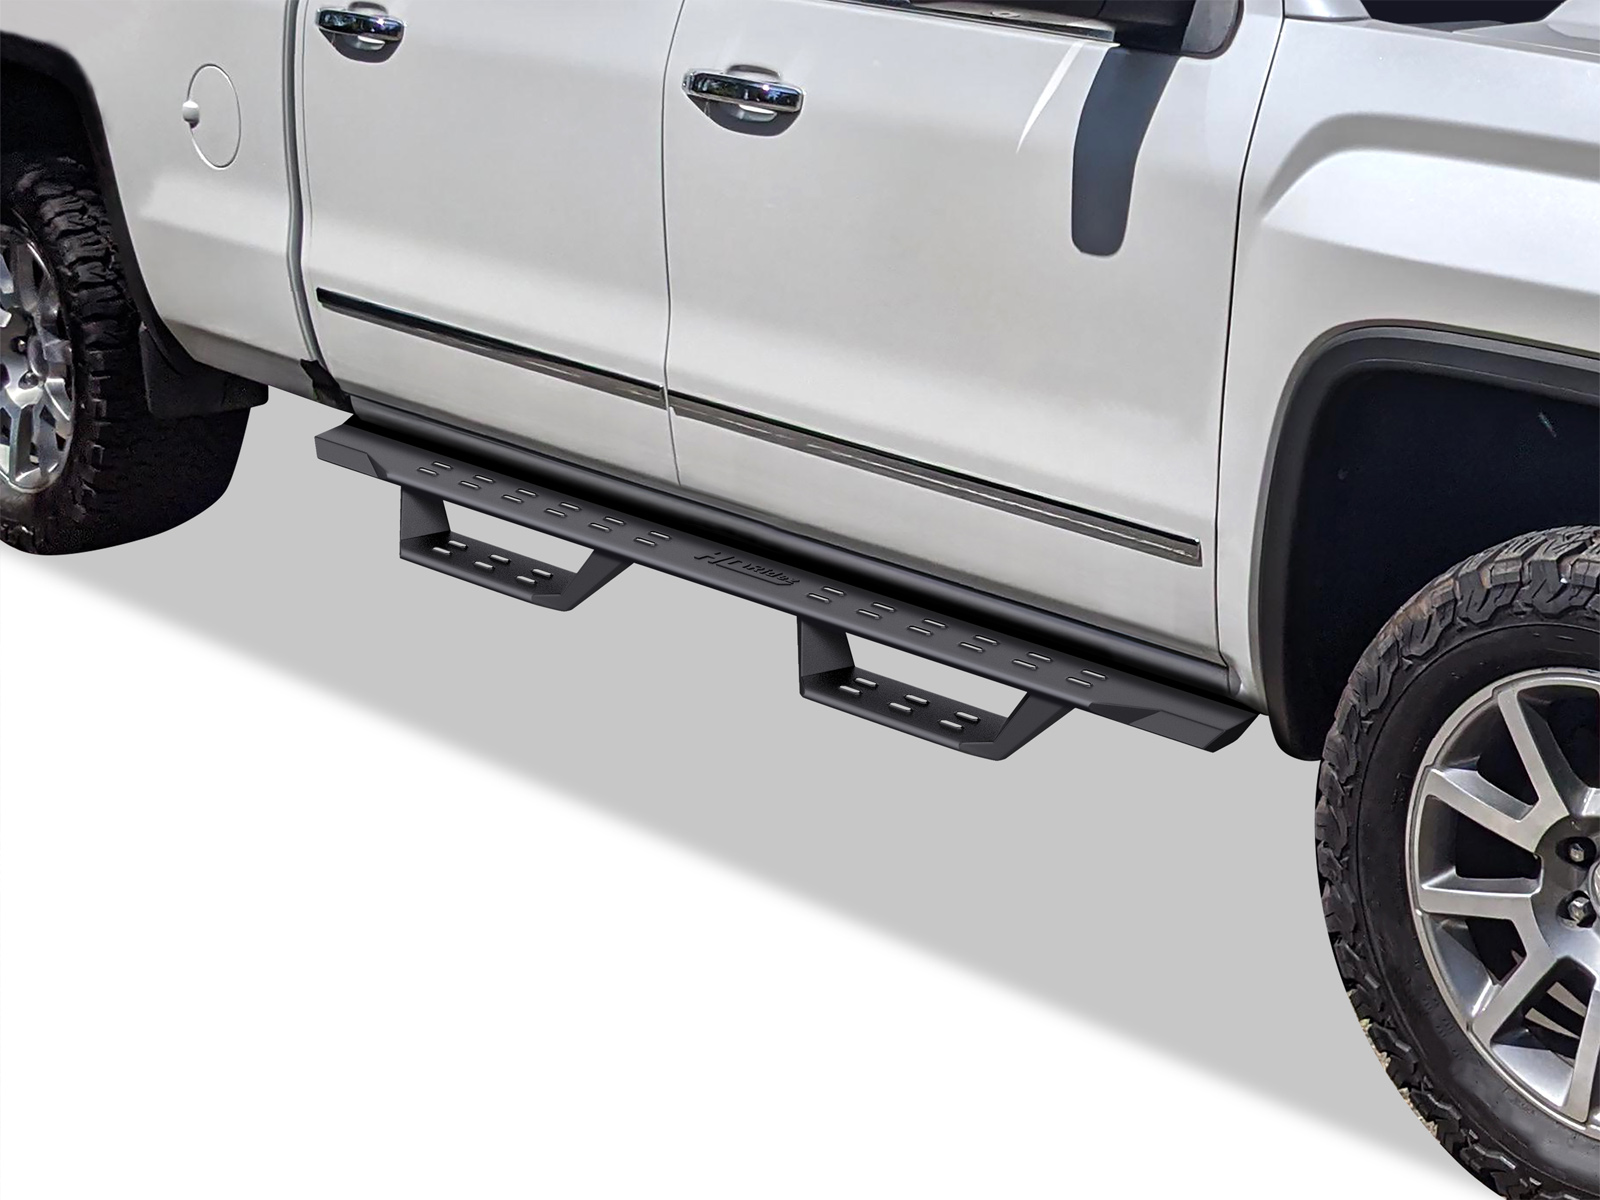 2007-2018 Chevy Silverado/ GMC Sierra 1500 Crew Cab  2007-2019 Chevy Silverado/ GMC Sierra 2500 HD/3500 HD Crew Cab (Incl. Diesel Models With DEF Tanks| Not for 07 Classic Model) Both Sides Side Armor RS